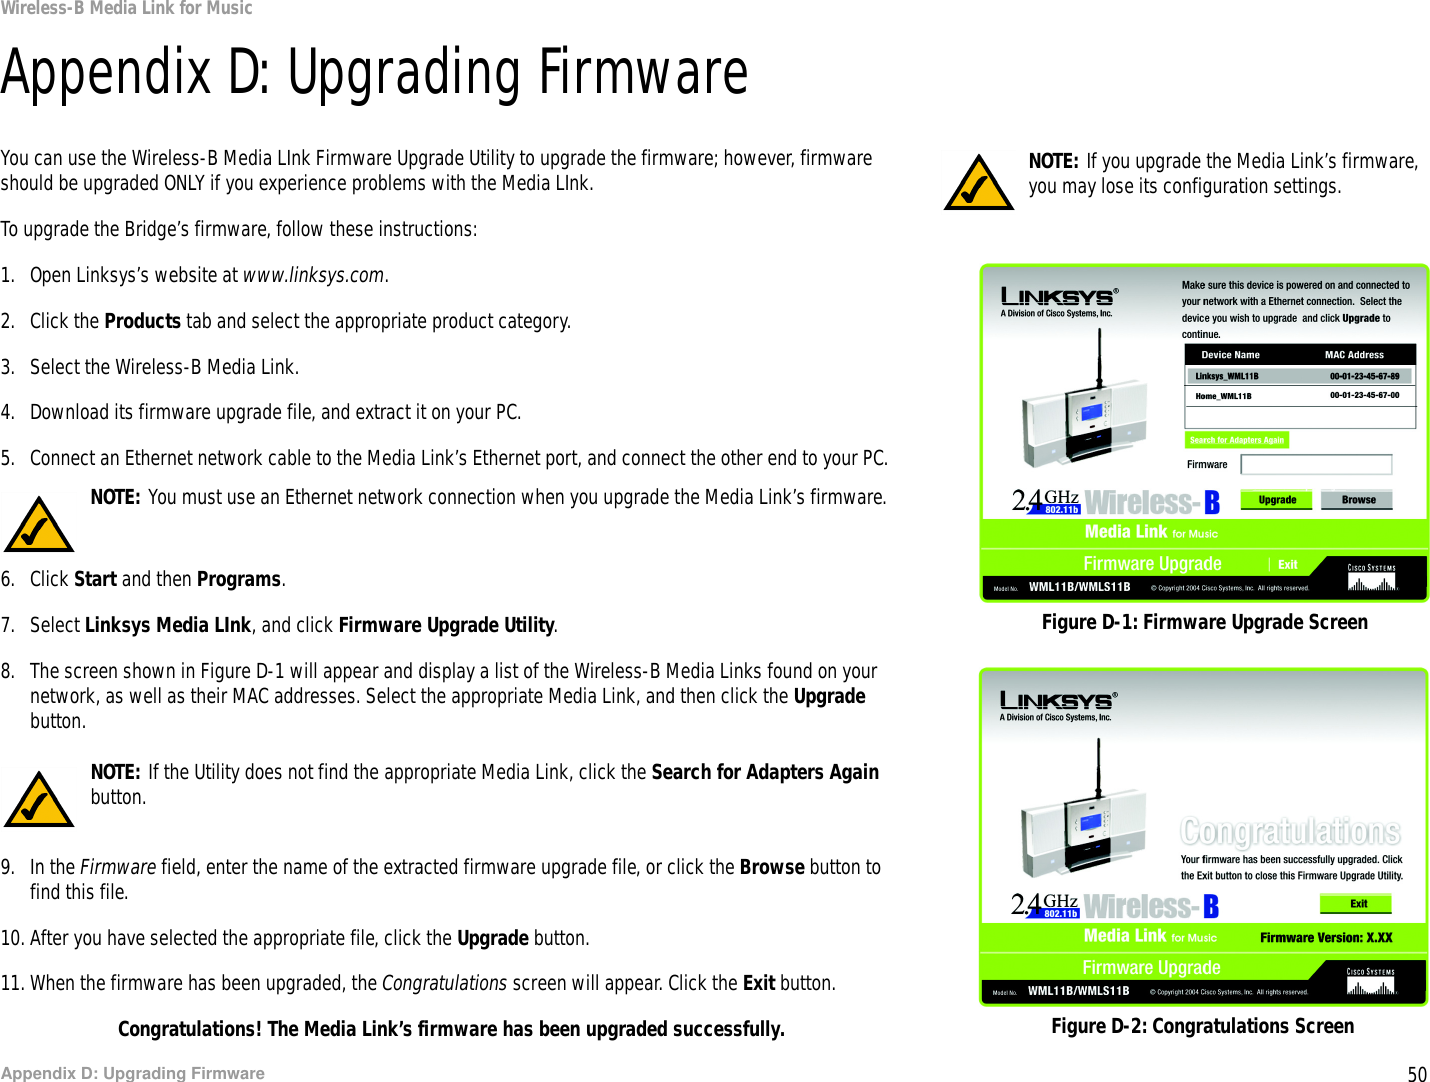 50Appendix D: Upgrading FirmwareWireless-B Media Link for MusicAppendix D: Upgrading FirmwareYou can use the Wireless-B Media LInk Firmware Upgrade Utility to upgrade the firmware; however, firmware should be upgraded ONLY if you experience problems with the Media LInk.To upgrade the Bridge’s firmware, follow these instructions:1. Open Linksys’s website at www.linksys.com.2. Click the Products tab and select the appropriate product category.3. Select the Wireless-B Media Link.4. Download its firmware upgrade file, and extract it on your PC.5. Connect an Ethernet network cable to the Media Link’s Ethernet port, and connect the other end to your PC.6. Click Start and then Programs. 7. Select Linksys Media LInk, and click Firmware Upgrade Utility.8. The screen shown in Figure D-1 will appear and display a list of the Wireless-B Media Links found on your network, as well as their MAC addresses. Select the appropriate Media Link, and then click the Upgrade button.9. In the Firmware field, enter the name of the extracted firmware upgrade file, or click the Browse button to find this file.10. After you have selected the appropriate file, click the Upgrade button.11. When the firmware has been upgraded, the Congratulations screen will appear. Click the Exit button.Congratulations! The Media Link’s firmware has been upgraded successfully.Figure D-1: Firmware Upgrade ScreenNOTE: You must use an Ethernet network connection when you upgrade the Media Link’s firmware.NOTE: If the Utility does not find the appropriate Media Link, click the Search for Adapters Again button.NOTE: If you upgrade the Media Link’s firmware, you may lose its configuration settings.Figure D-2: Congratulations Screen